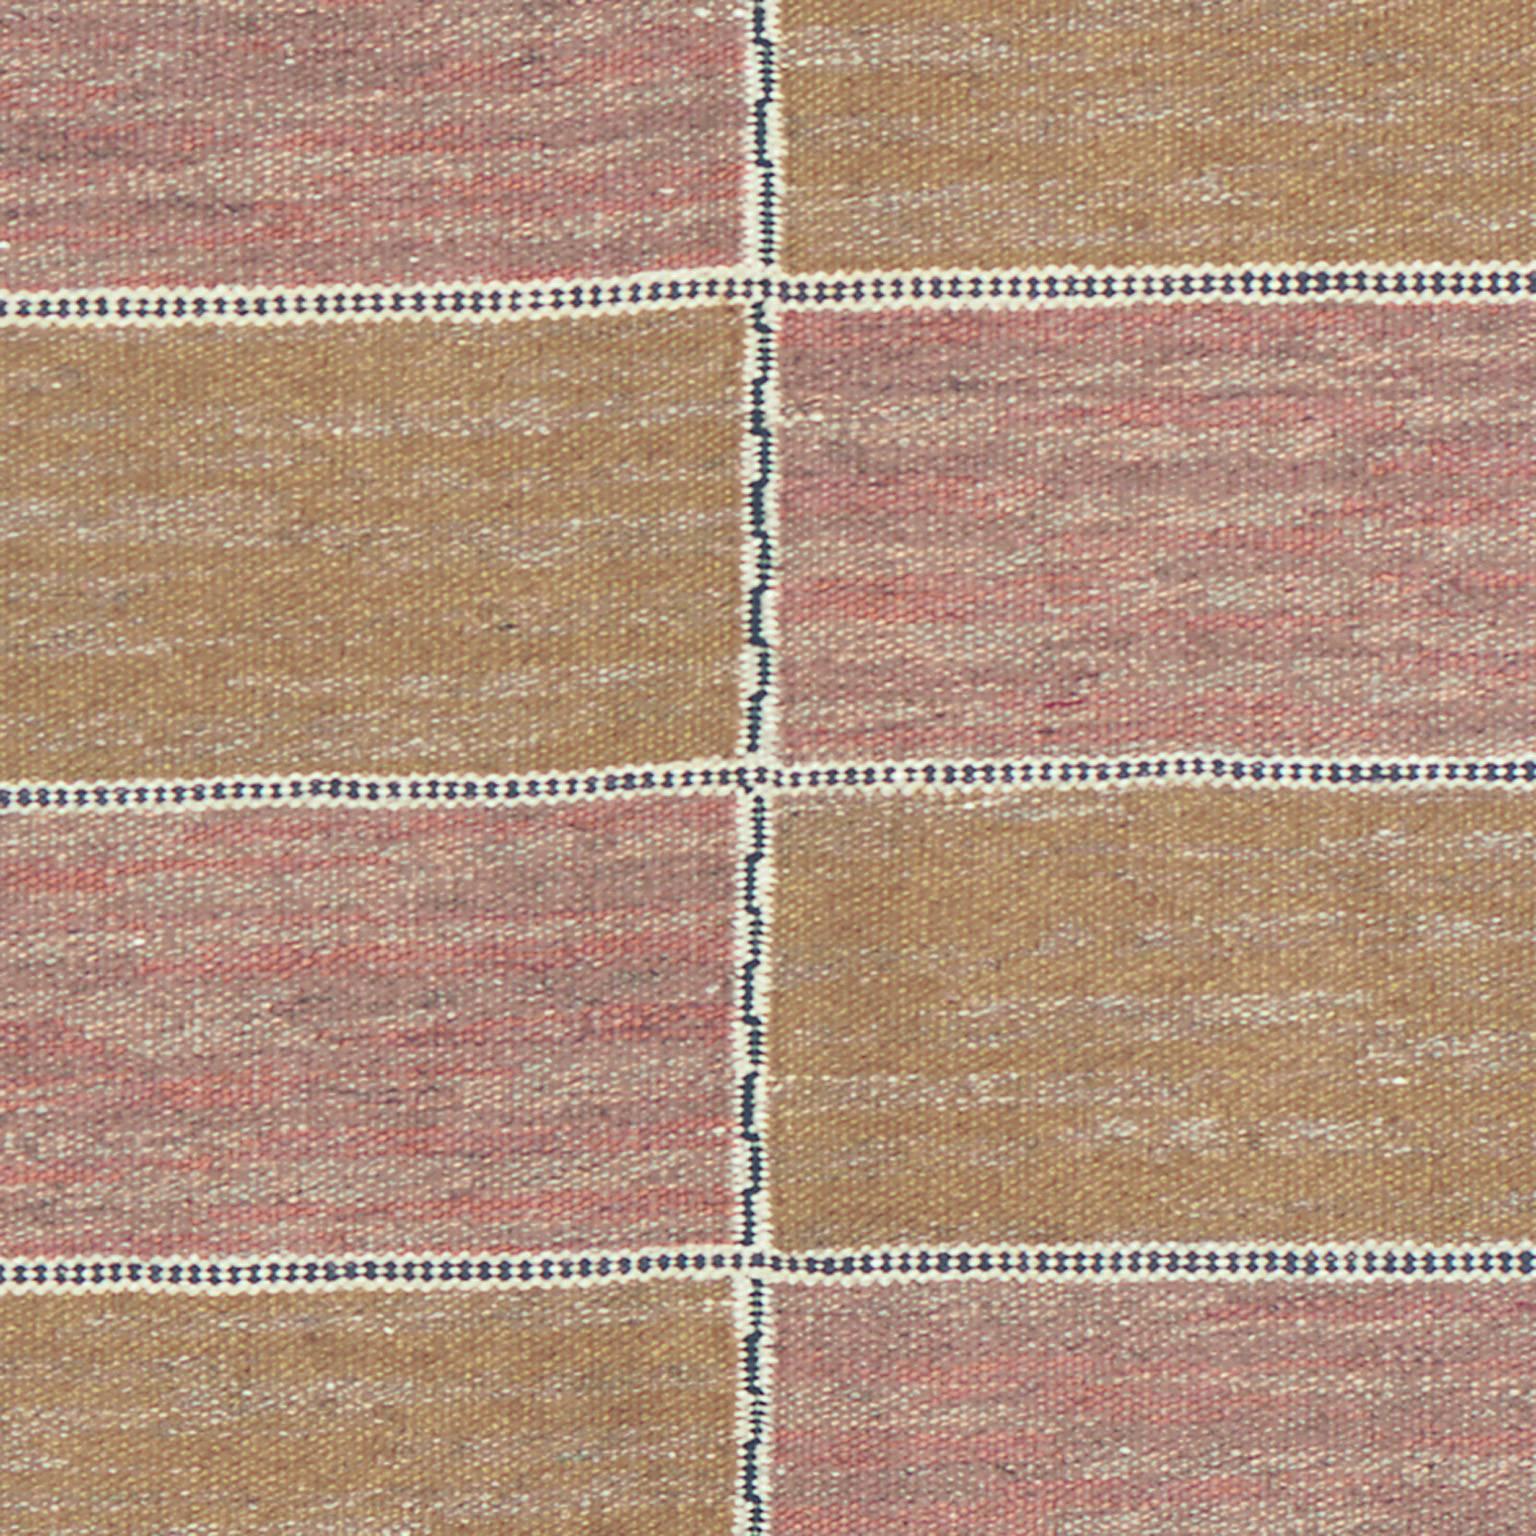 Hand-Woven Mid-20th Century Swedish Flat-Weave Carpet by AB Märta Måås-Fjetterström For Sale